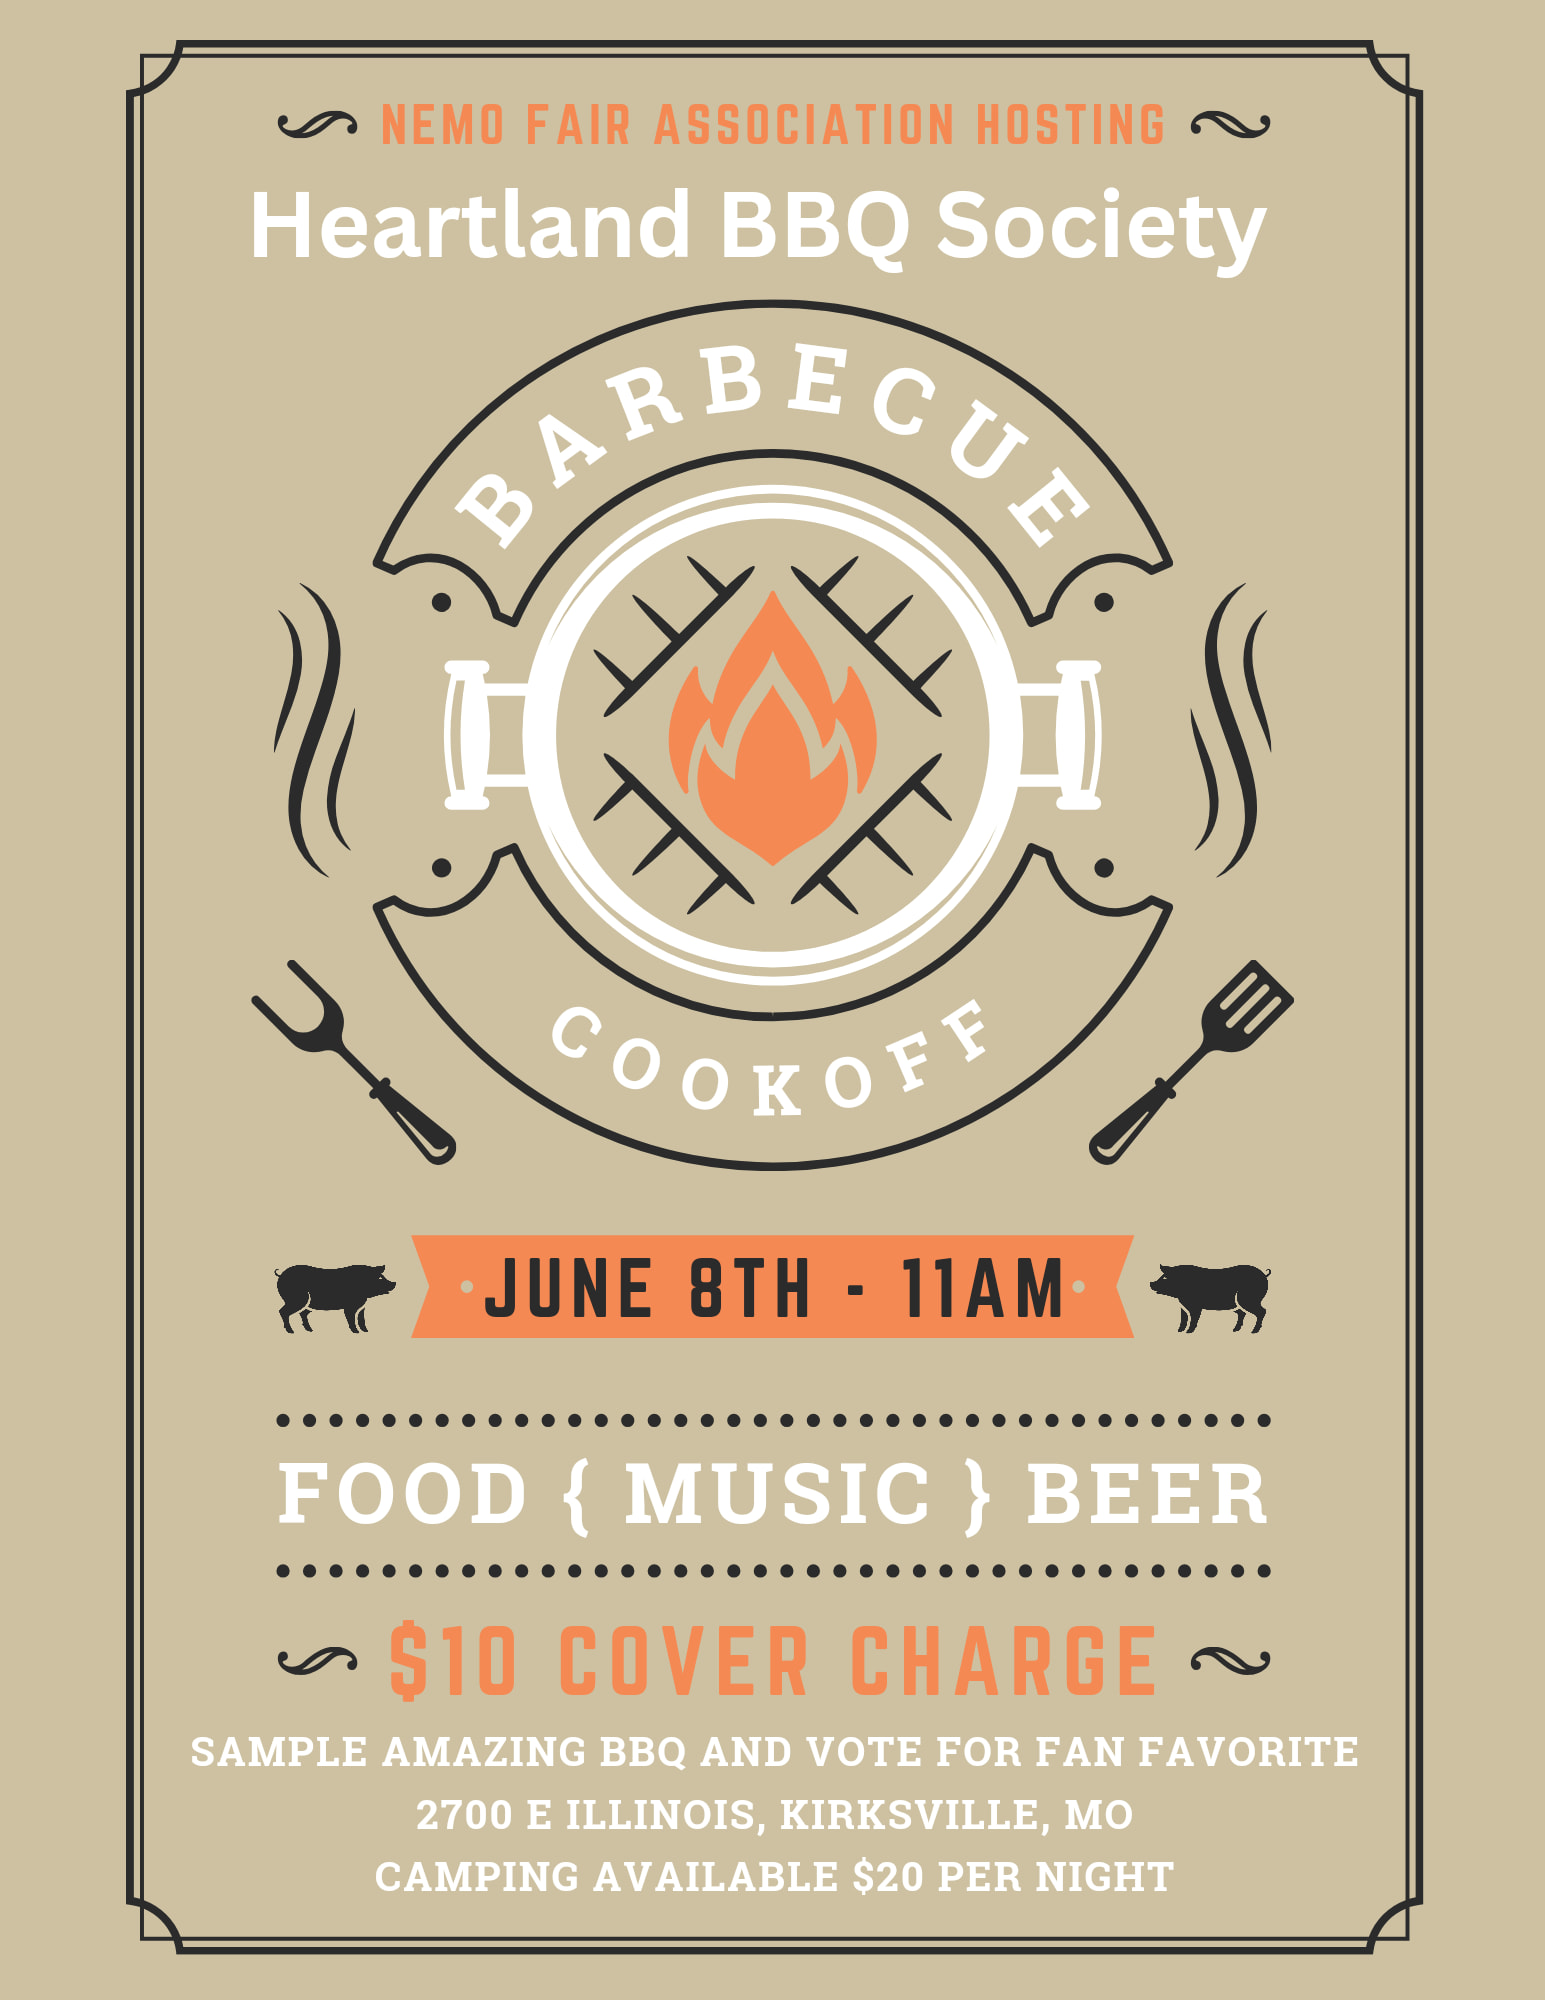 Check more about Heartland BBQ Society Barbecue Cookoff